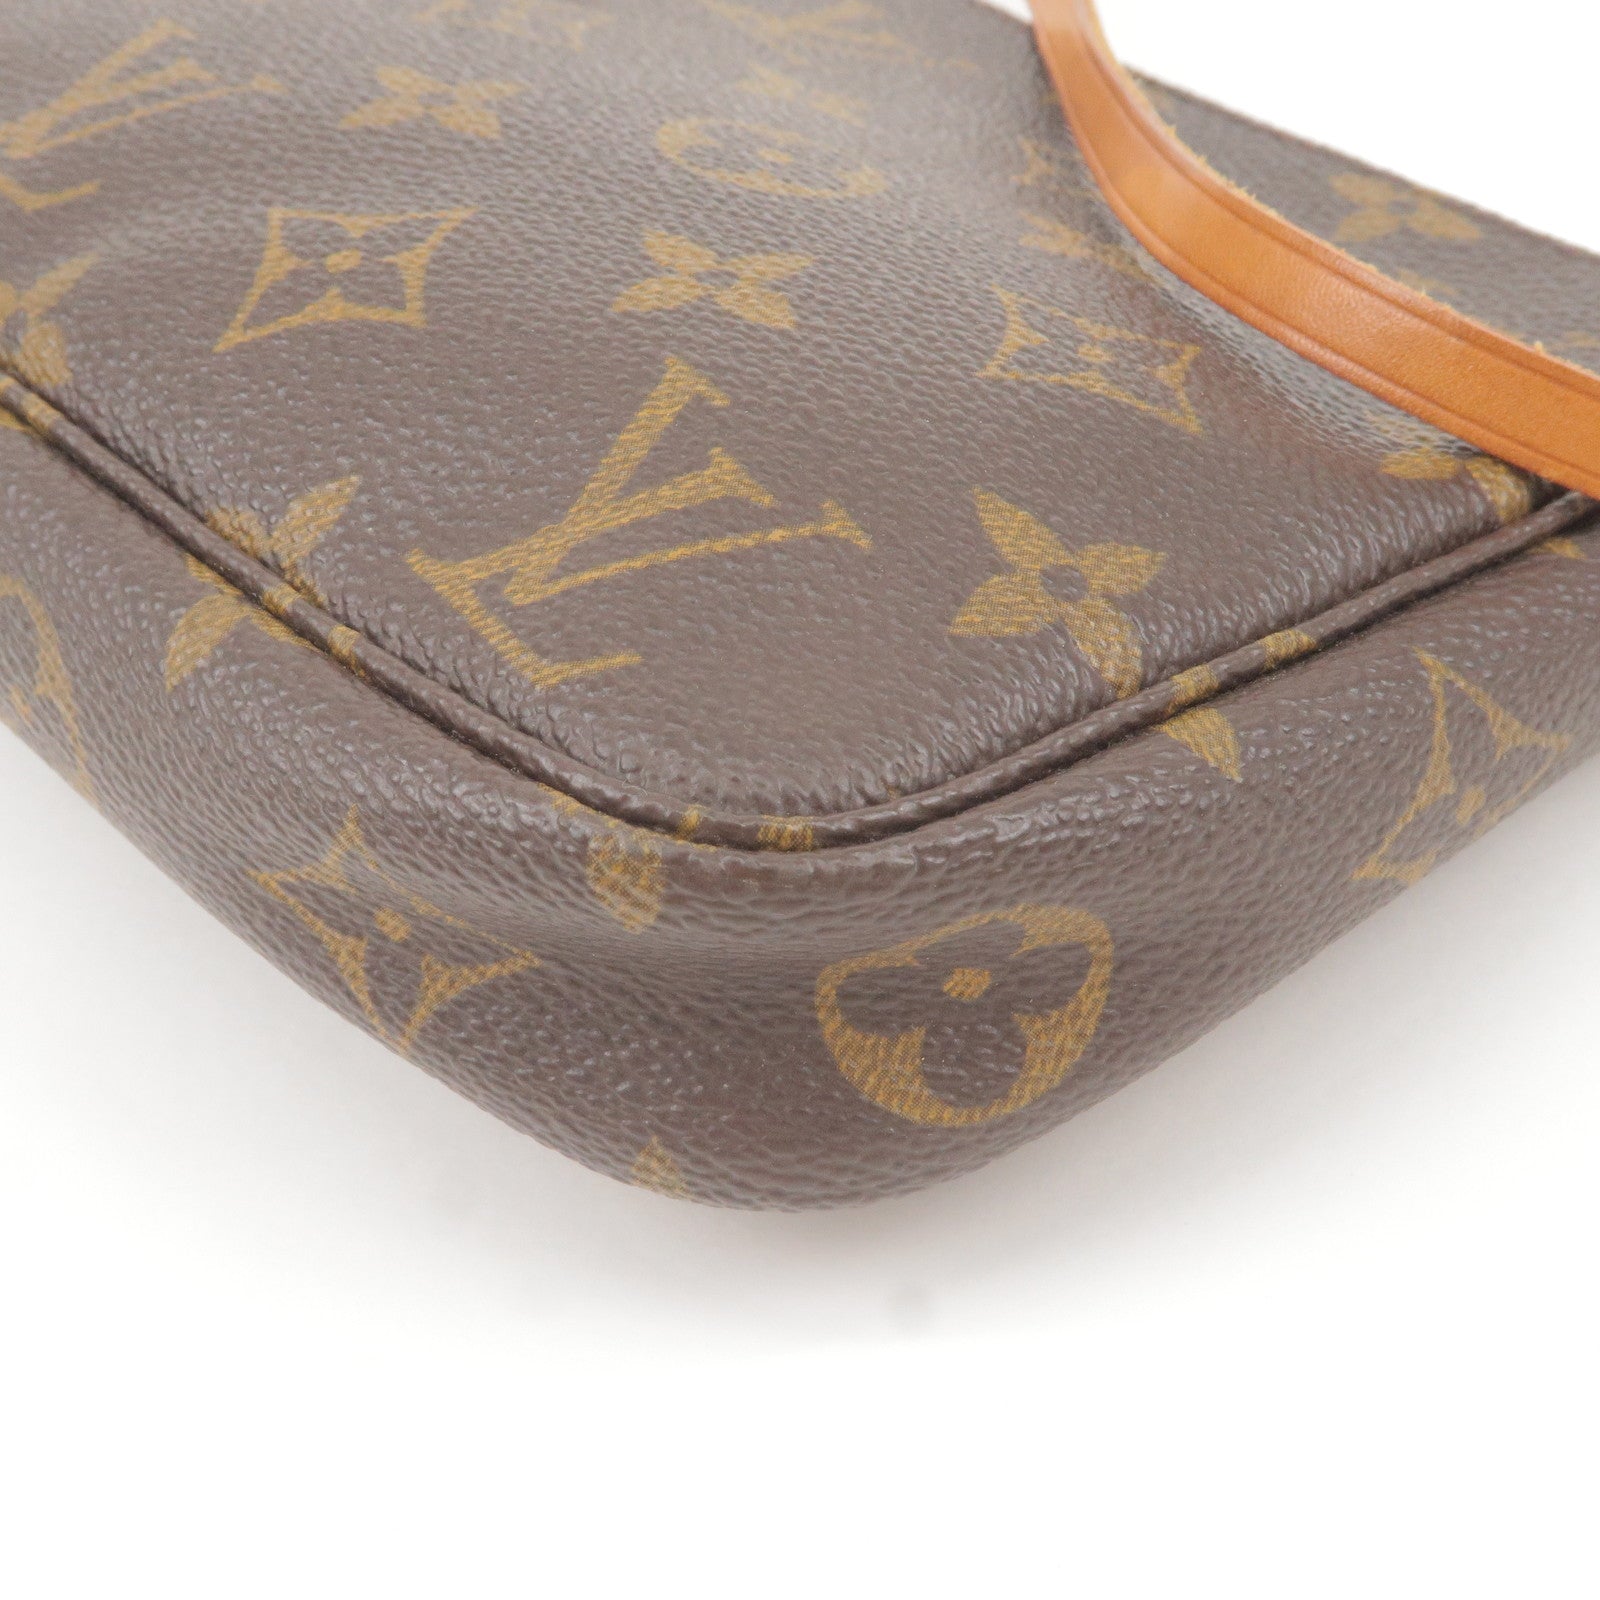 Louis Vuitton 2009 pre-owned Bosphore backpack